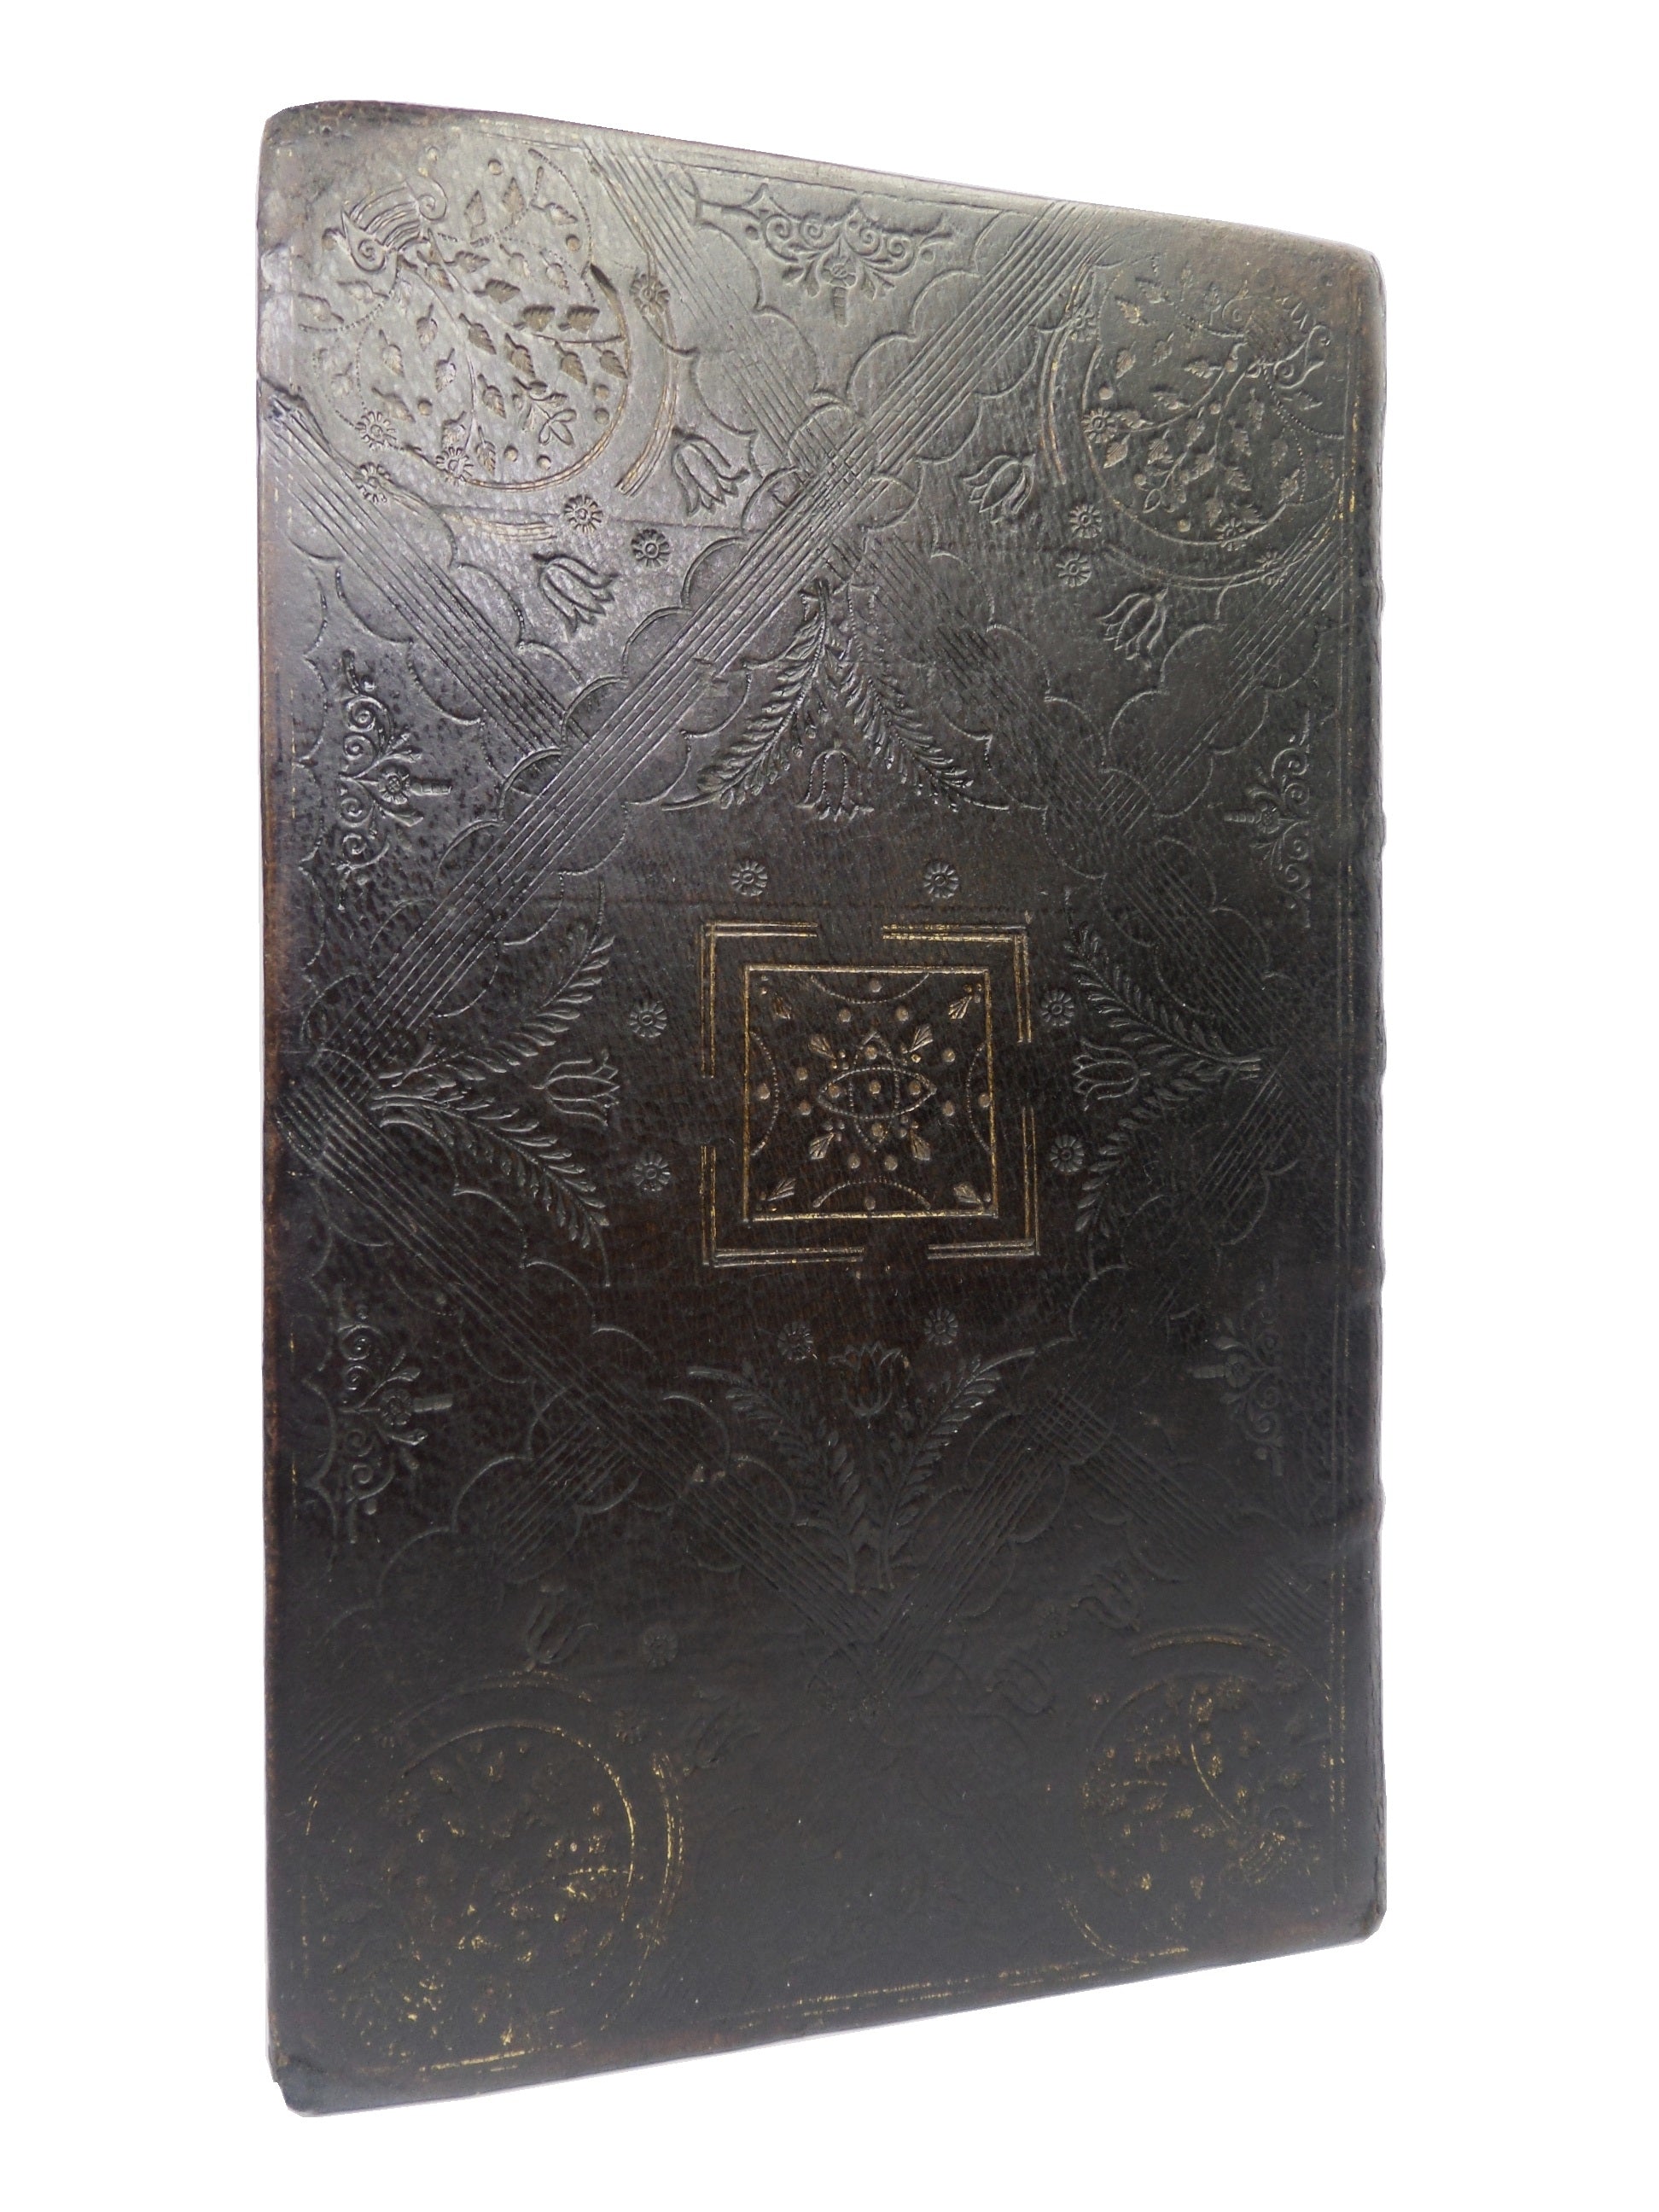 THE BOOK OF COMMON PRAYER & THE NEW TESTAMENT 1636-1675 FINE LEATHER BINDING